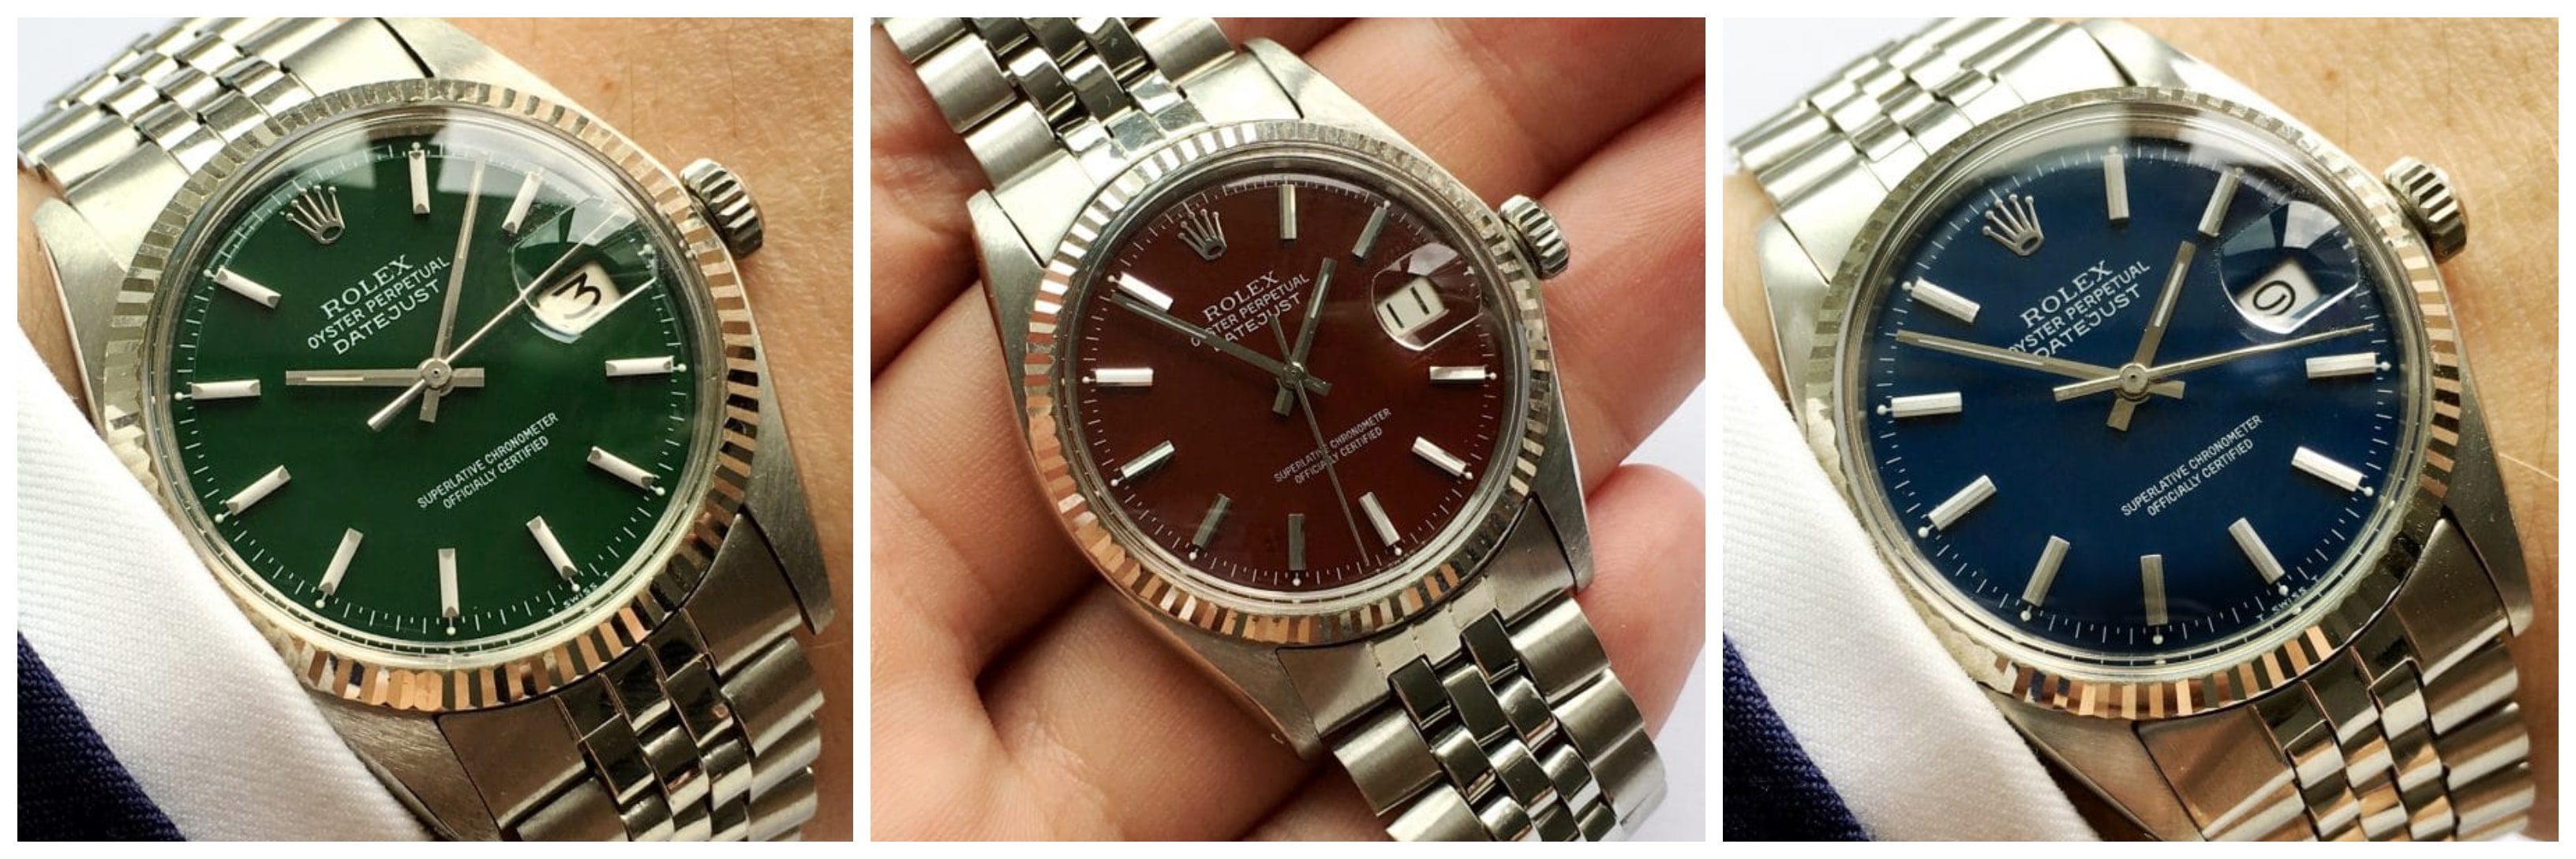 Details about  / ROLEX 1995 1996 Calendar Datejust Oysterdate Oyster Perpetual Date Turn-O-Graph